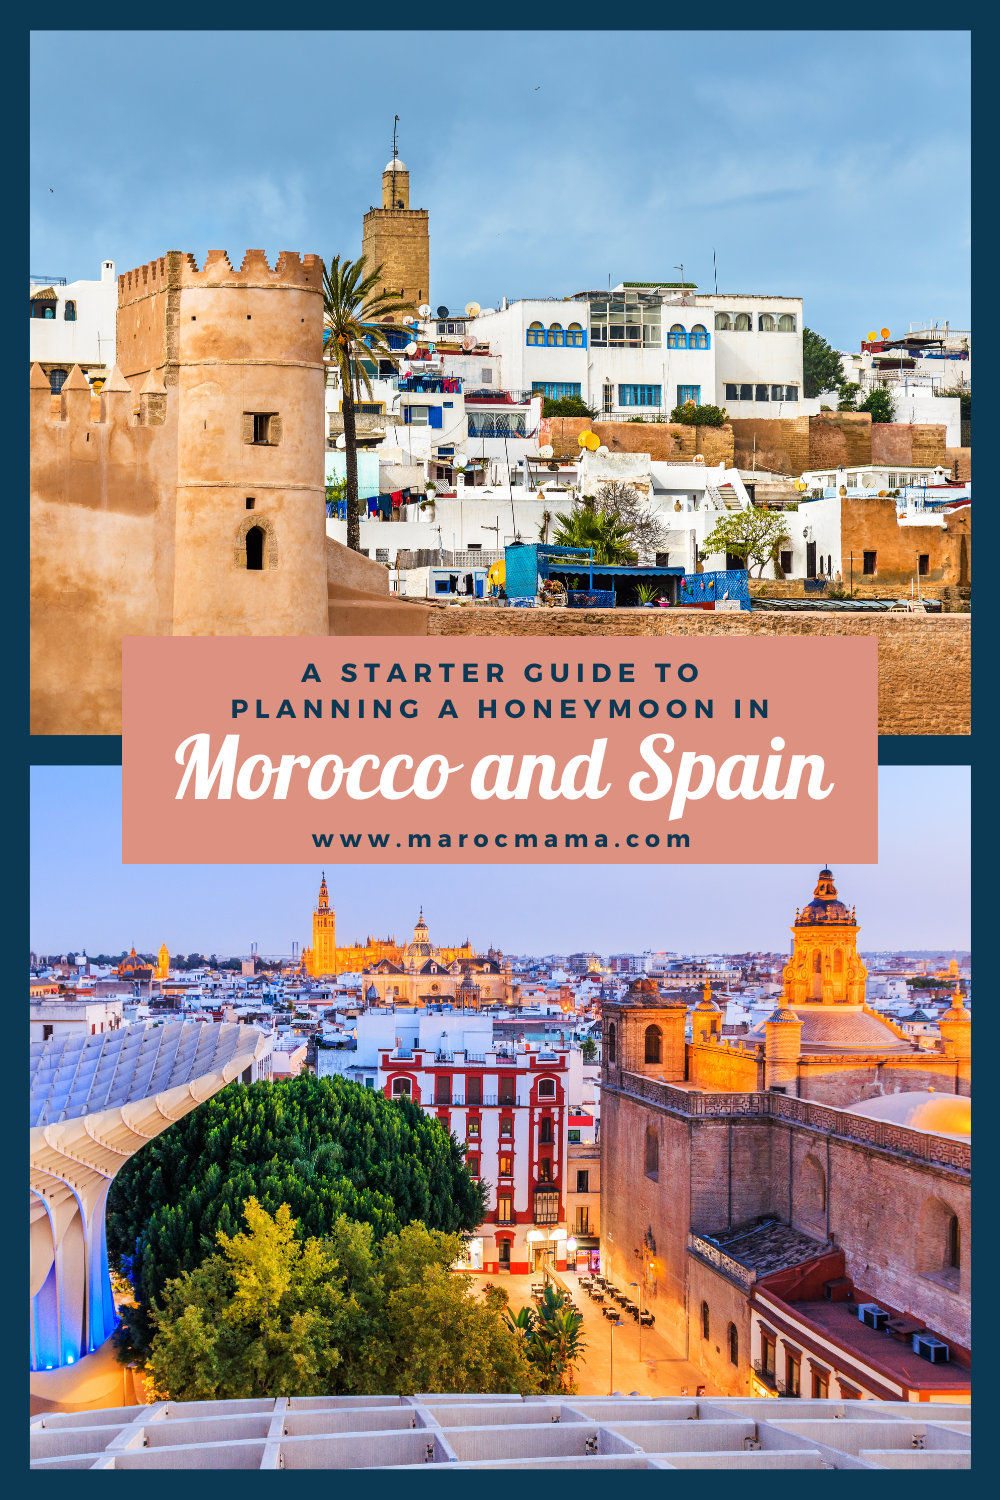 places to visit during your honeymoon in Morocco and Spain